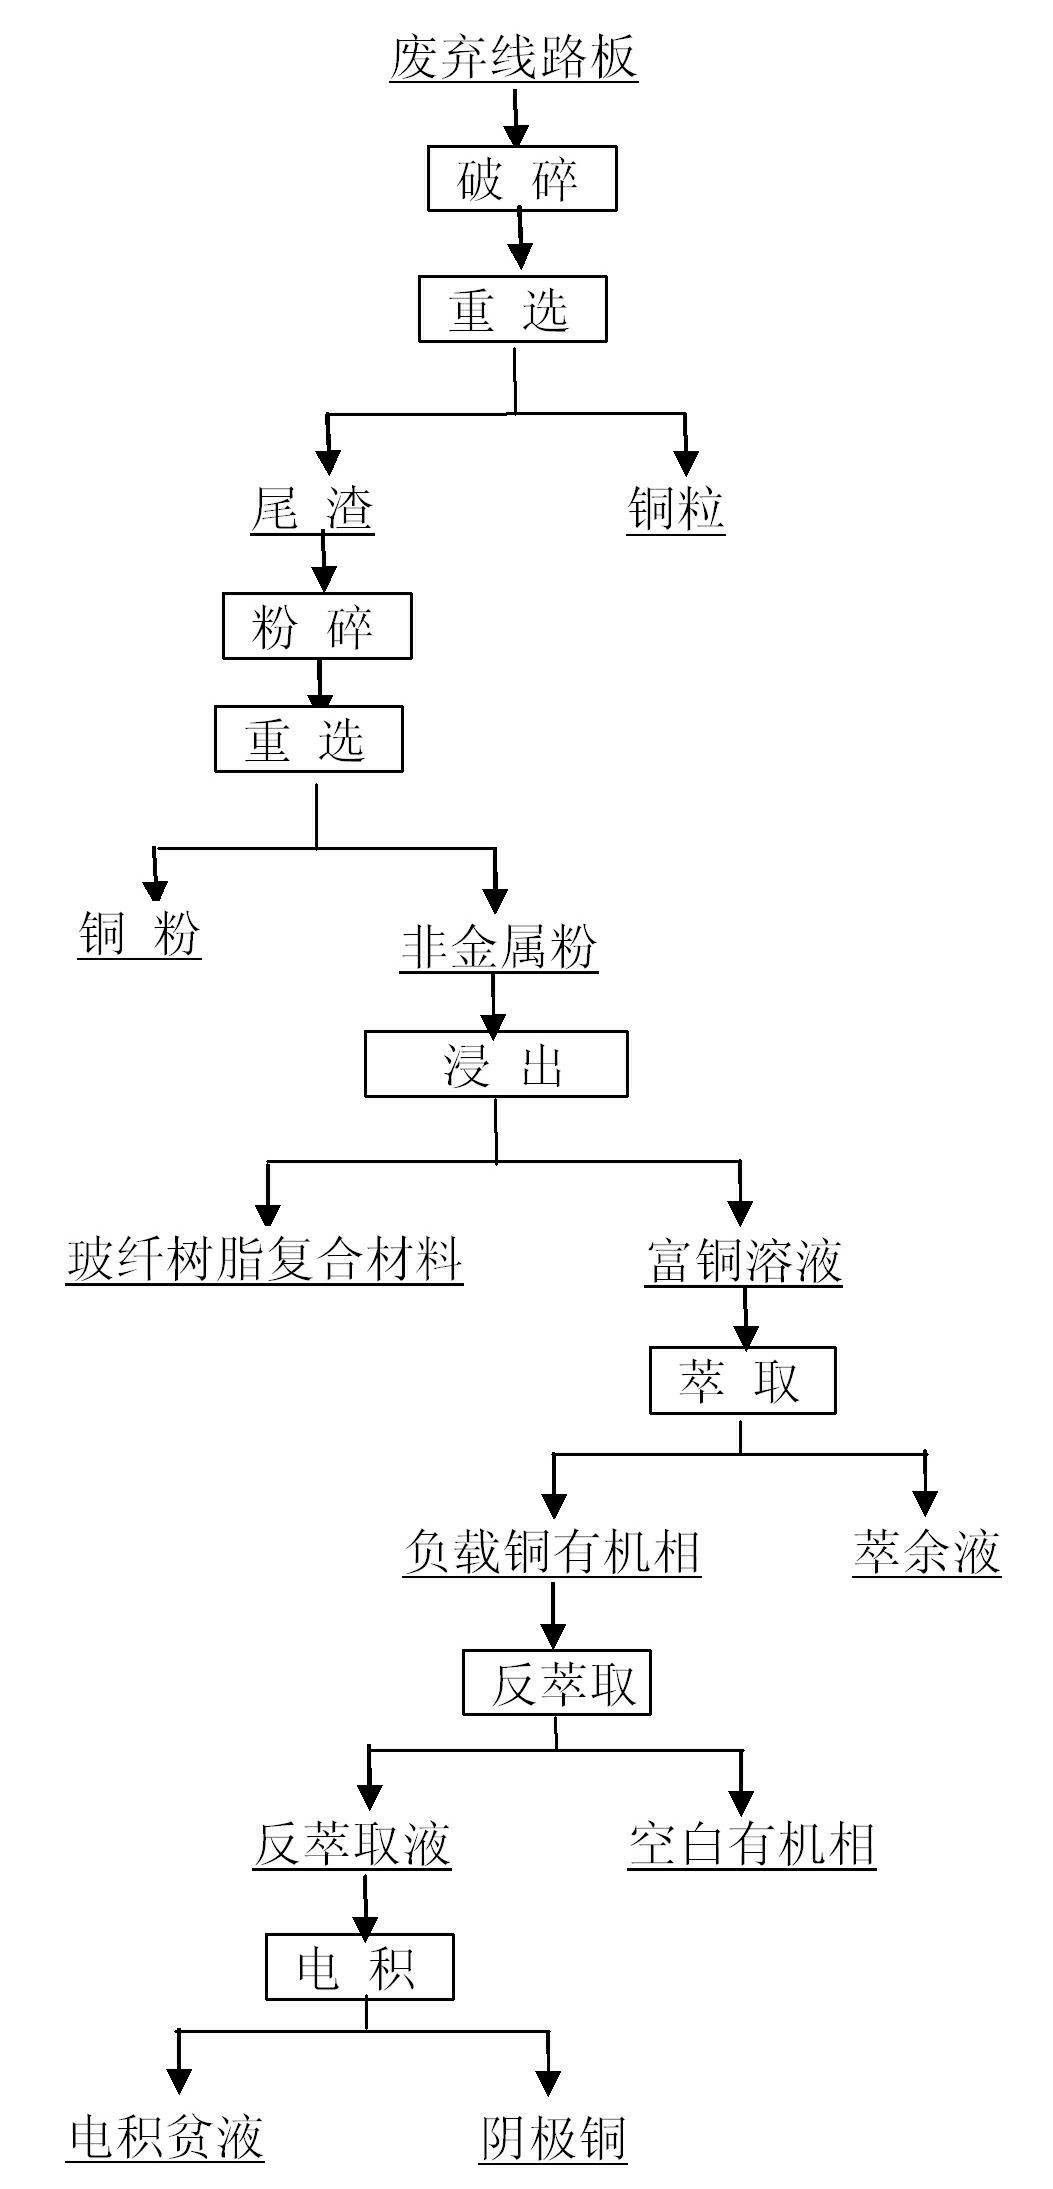 Recovery method for waste circuit board